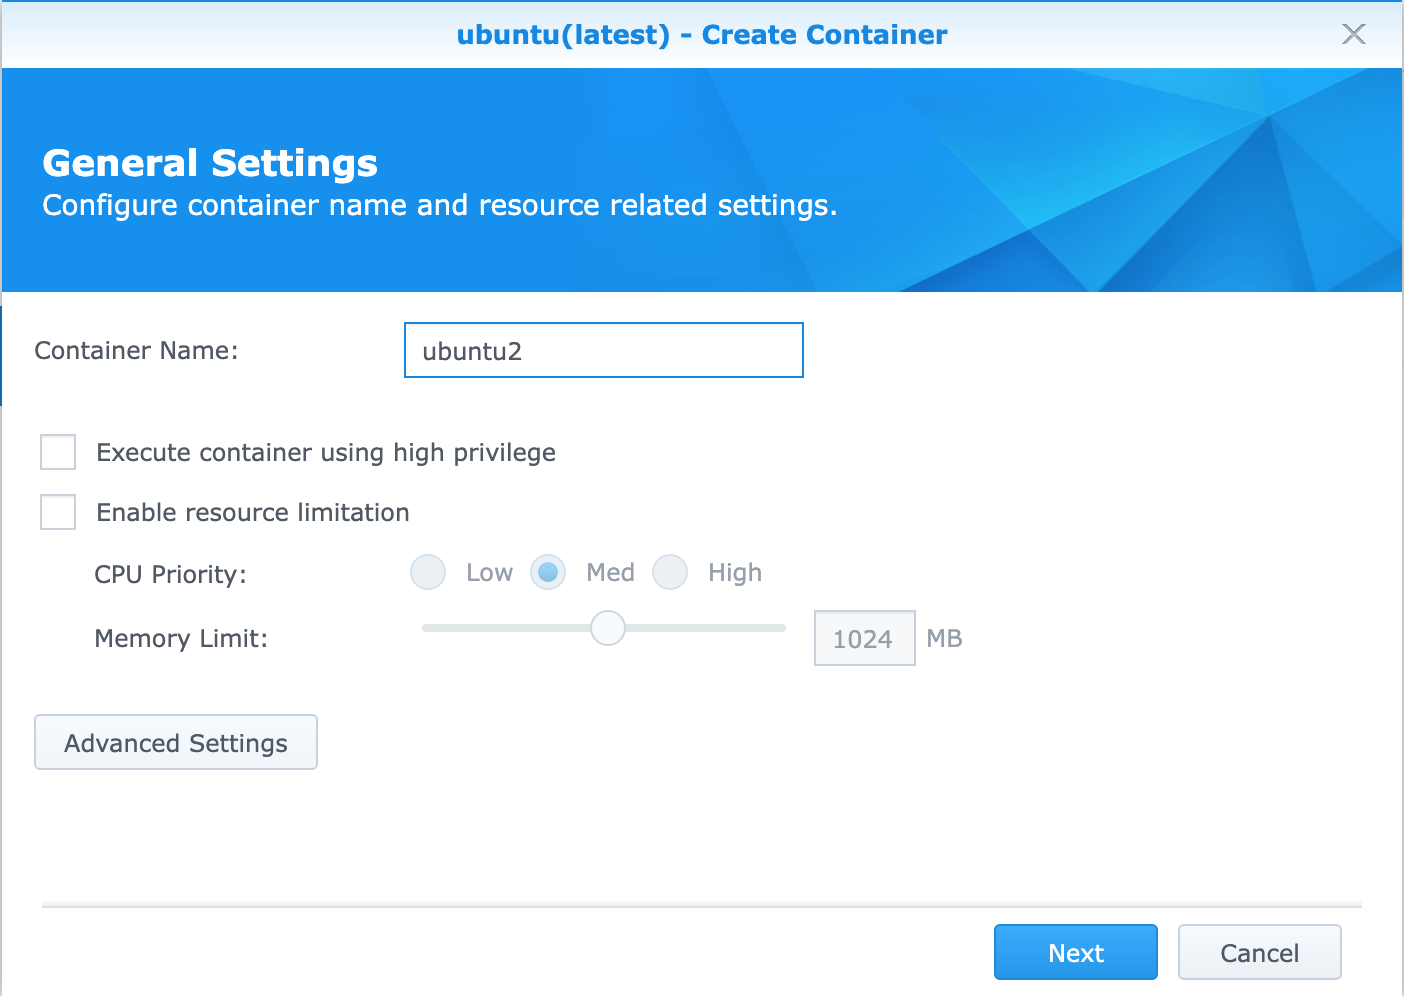 Leave all settings by default